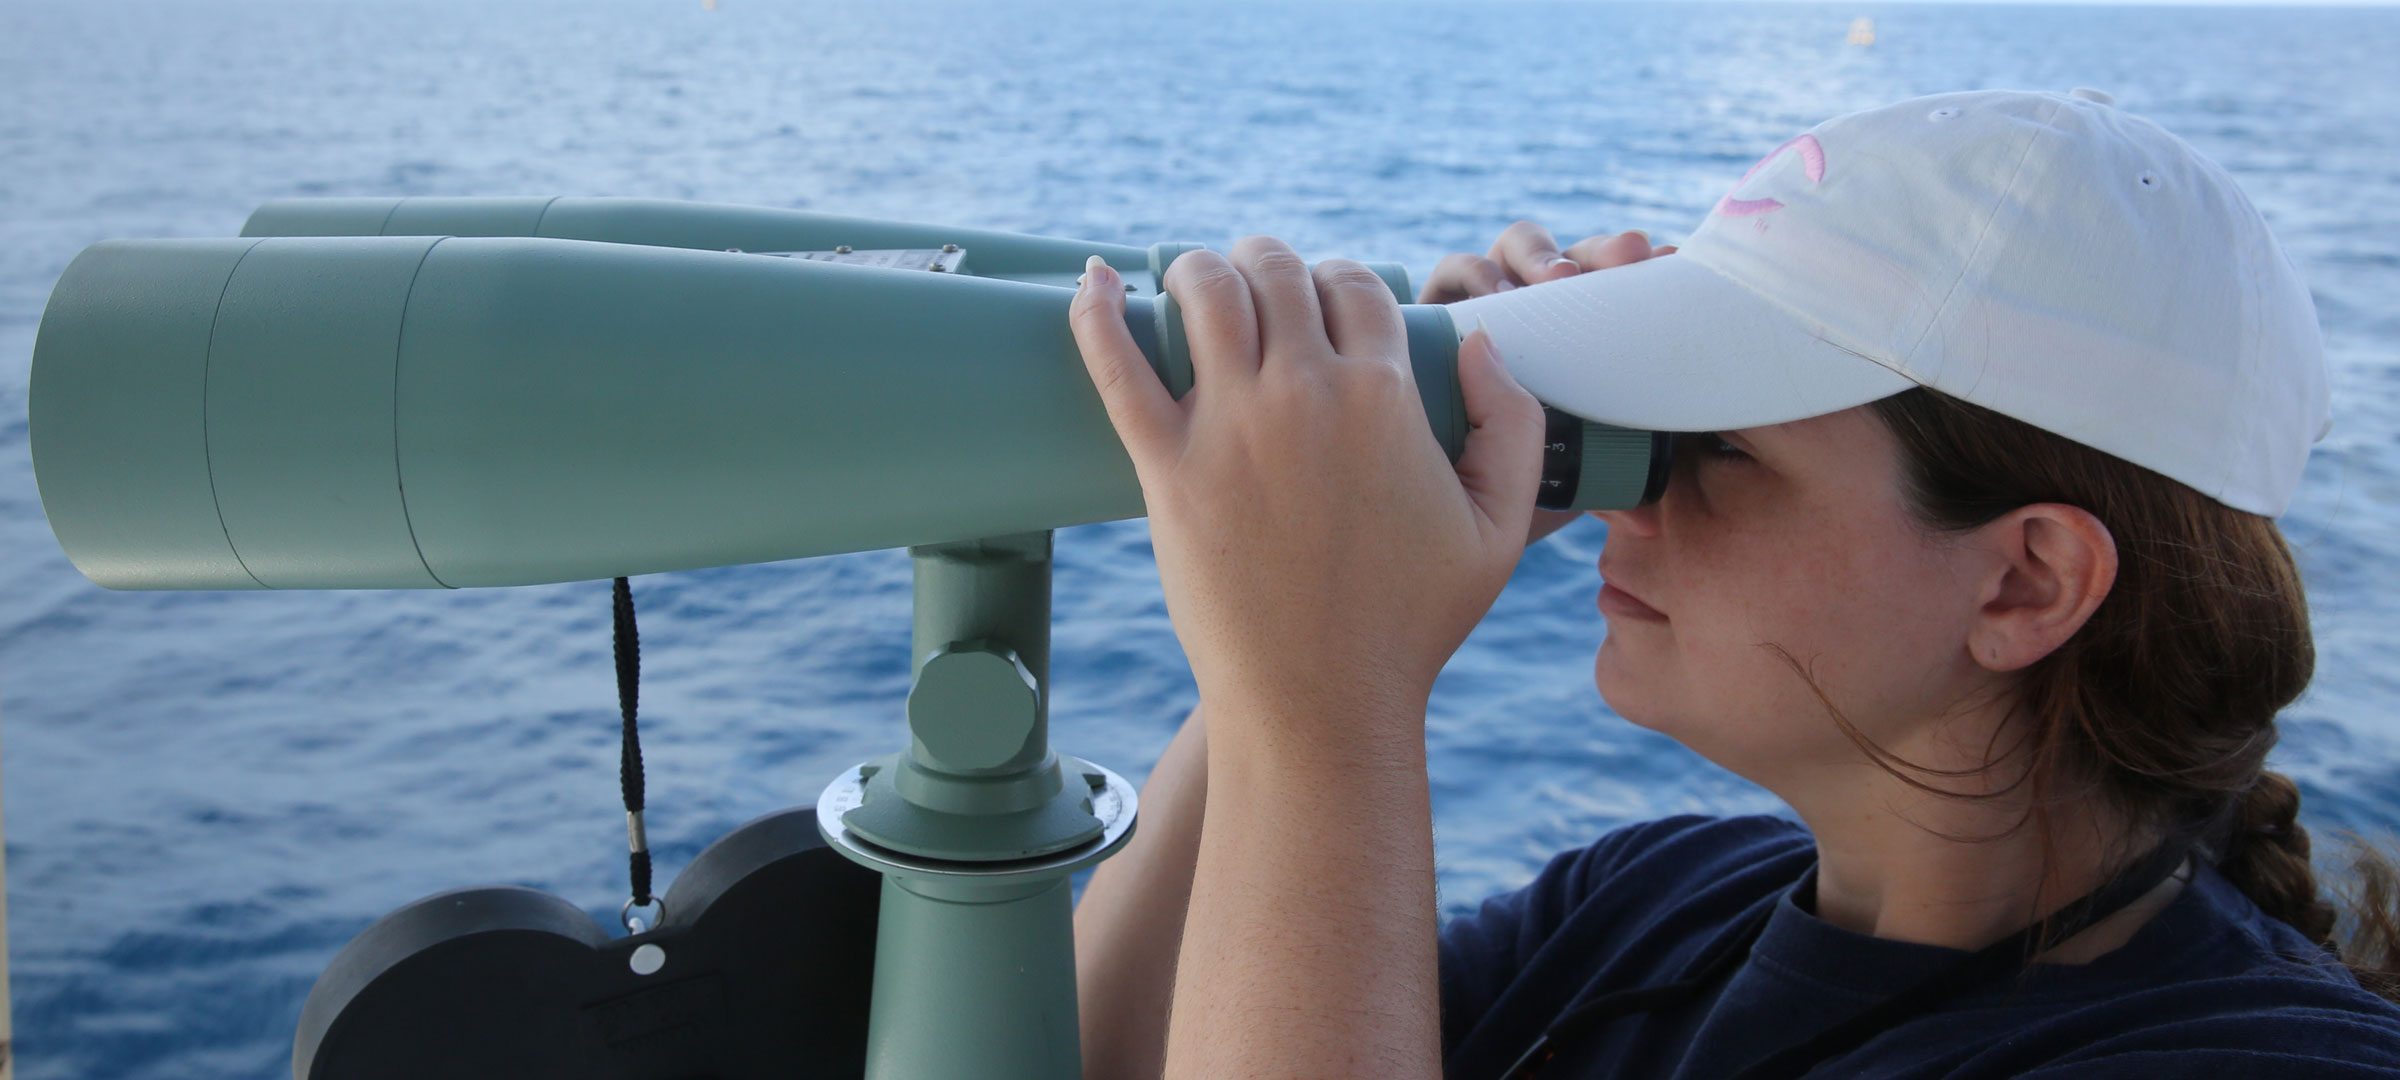 A 鶹ҹ research faculty member looks through binoculars over water during a research trip into the Gulf of Mexico